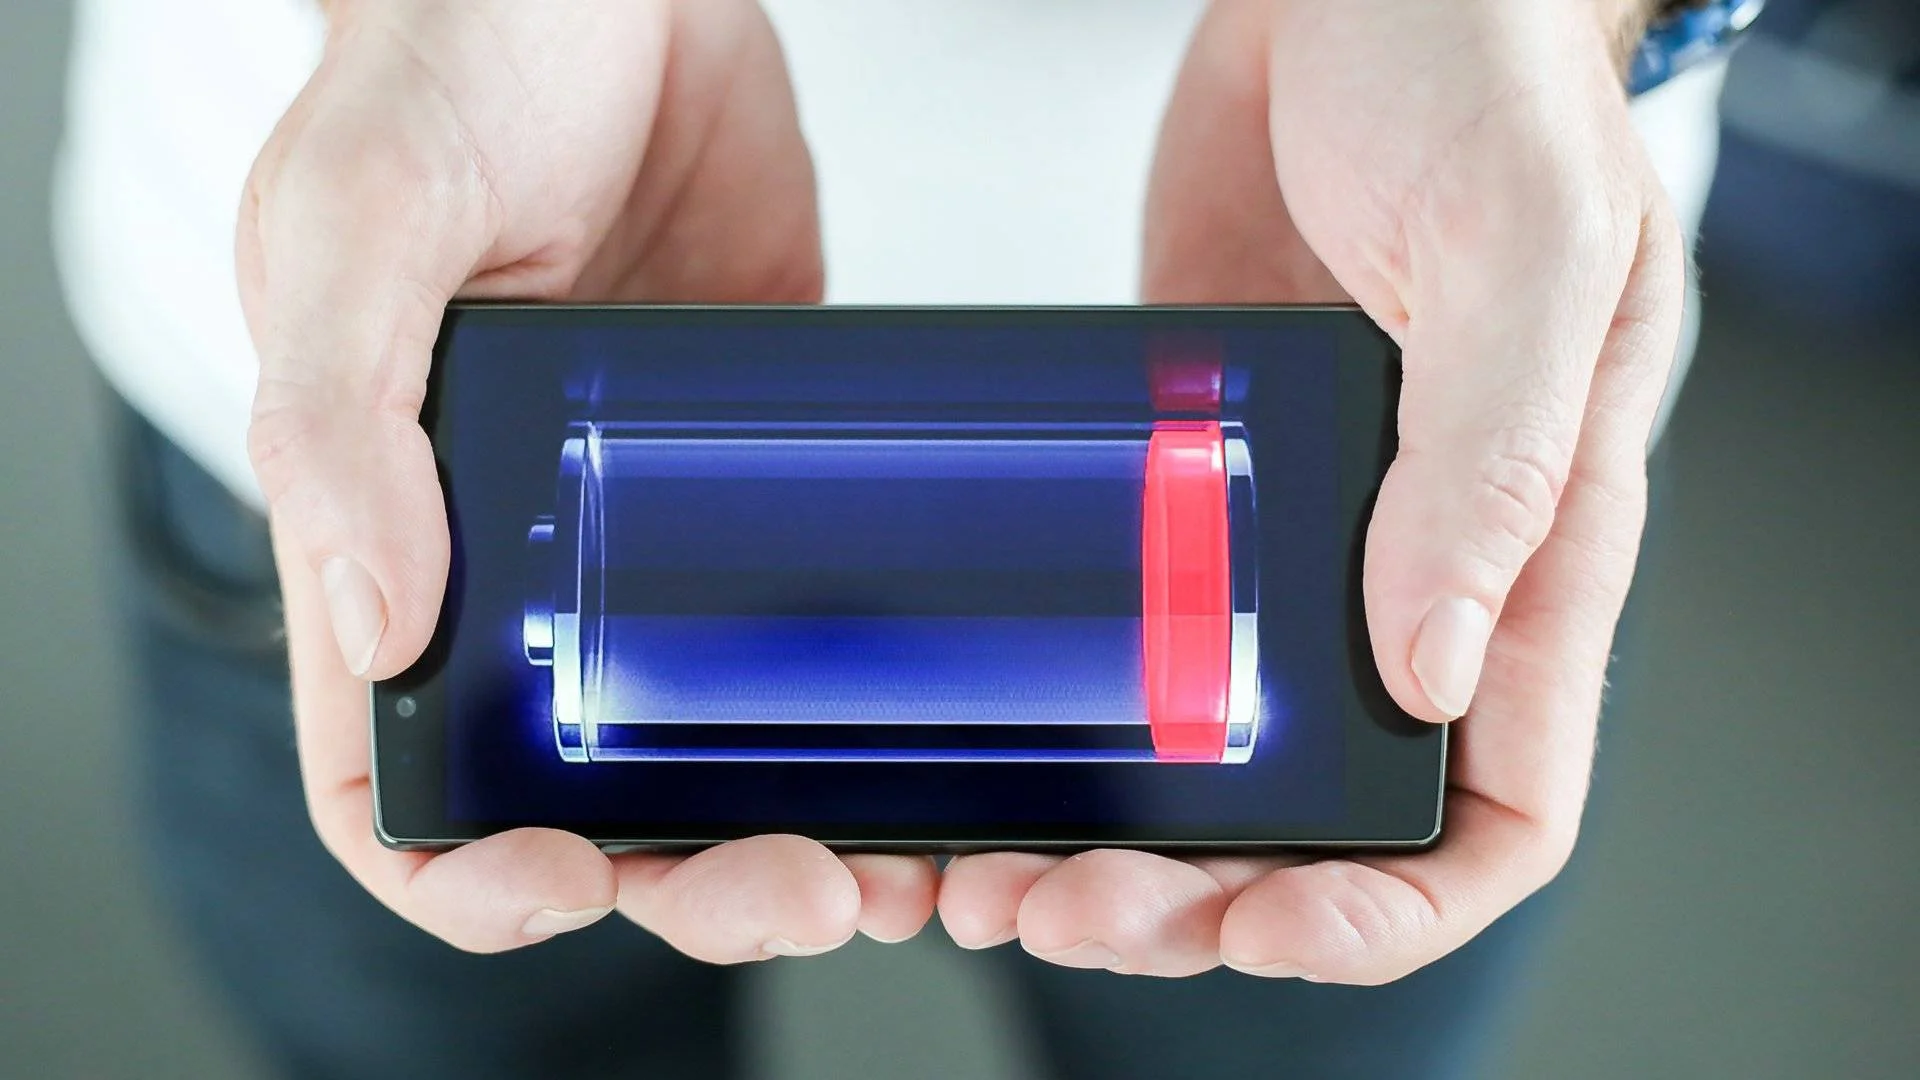 Xiaomi presented a new type of solid electrolyte batteries